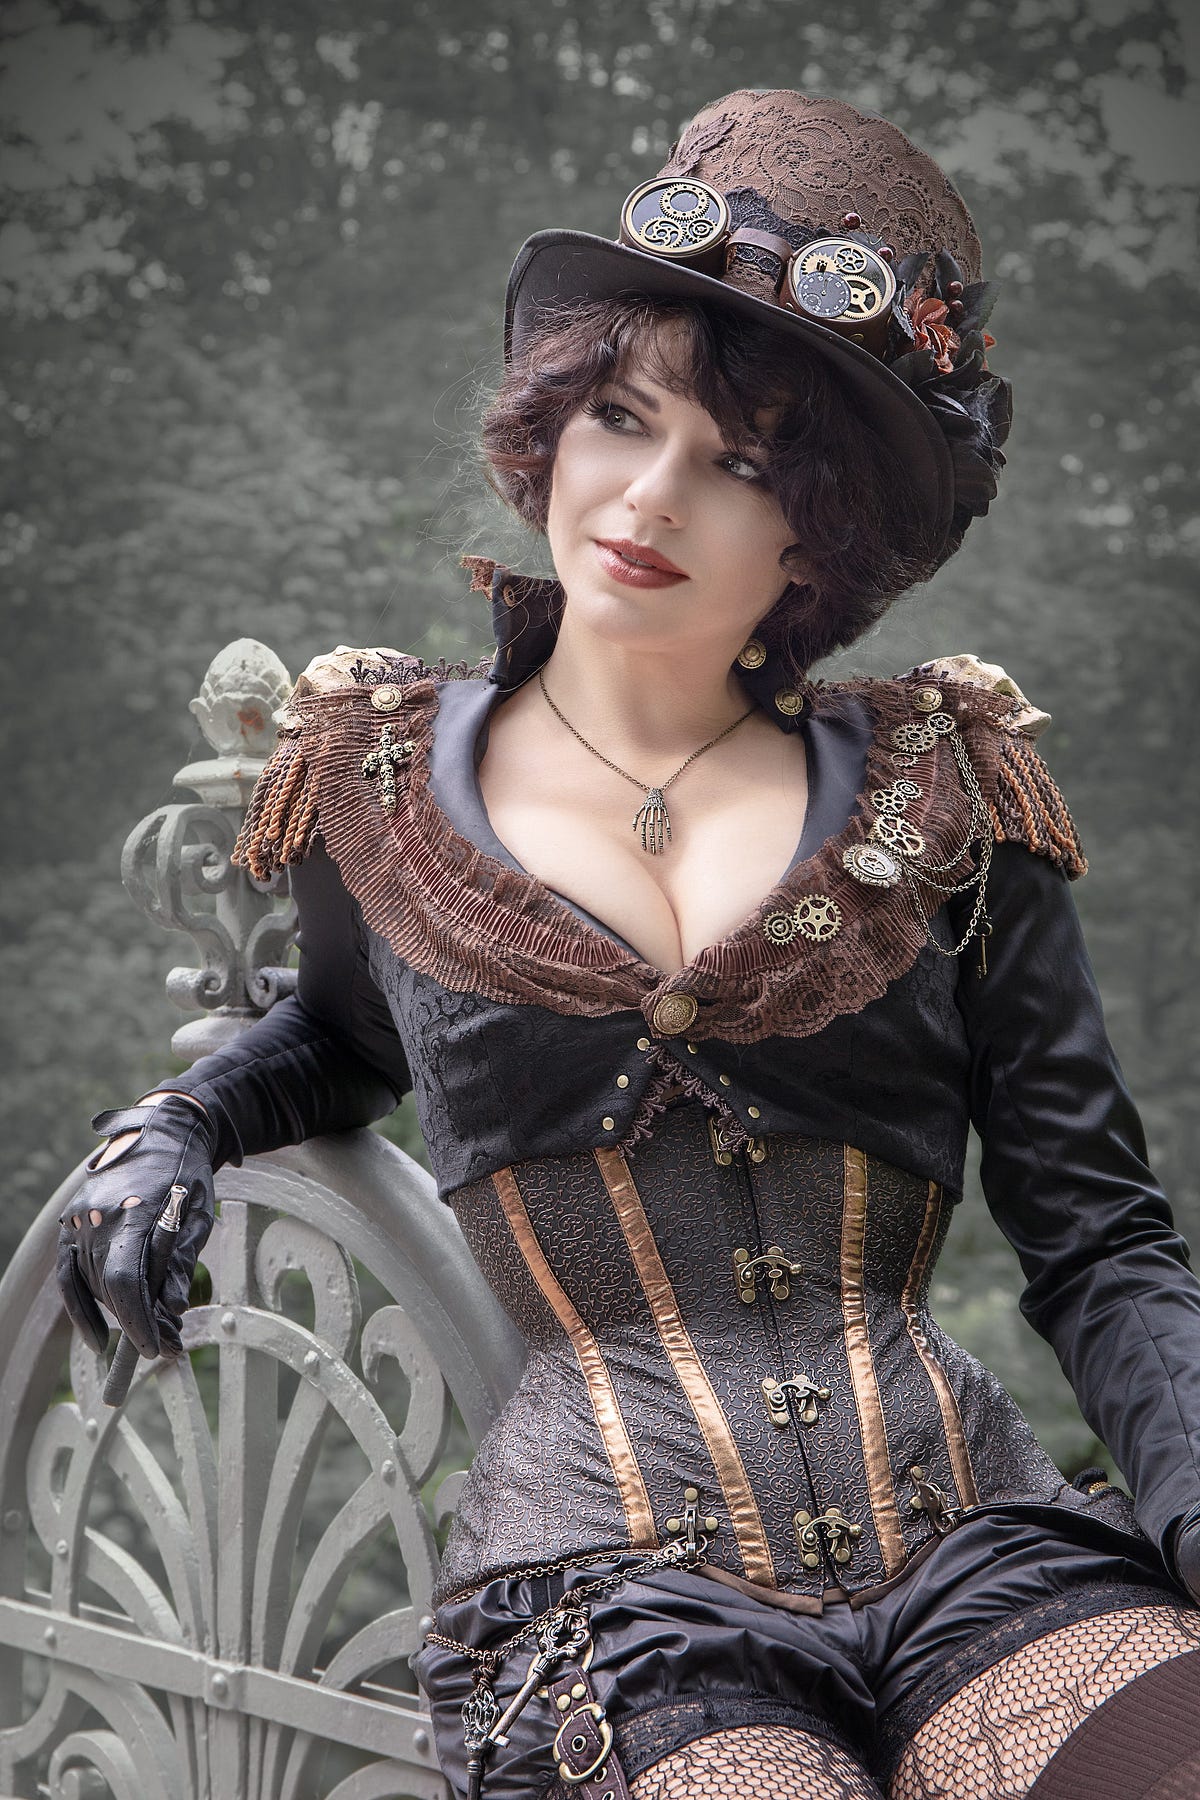 Incorporating Steampunk Tops into Modern Fashion, by Mira Edorra